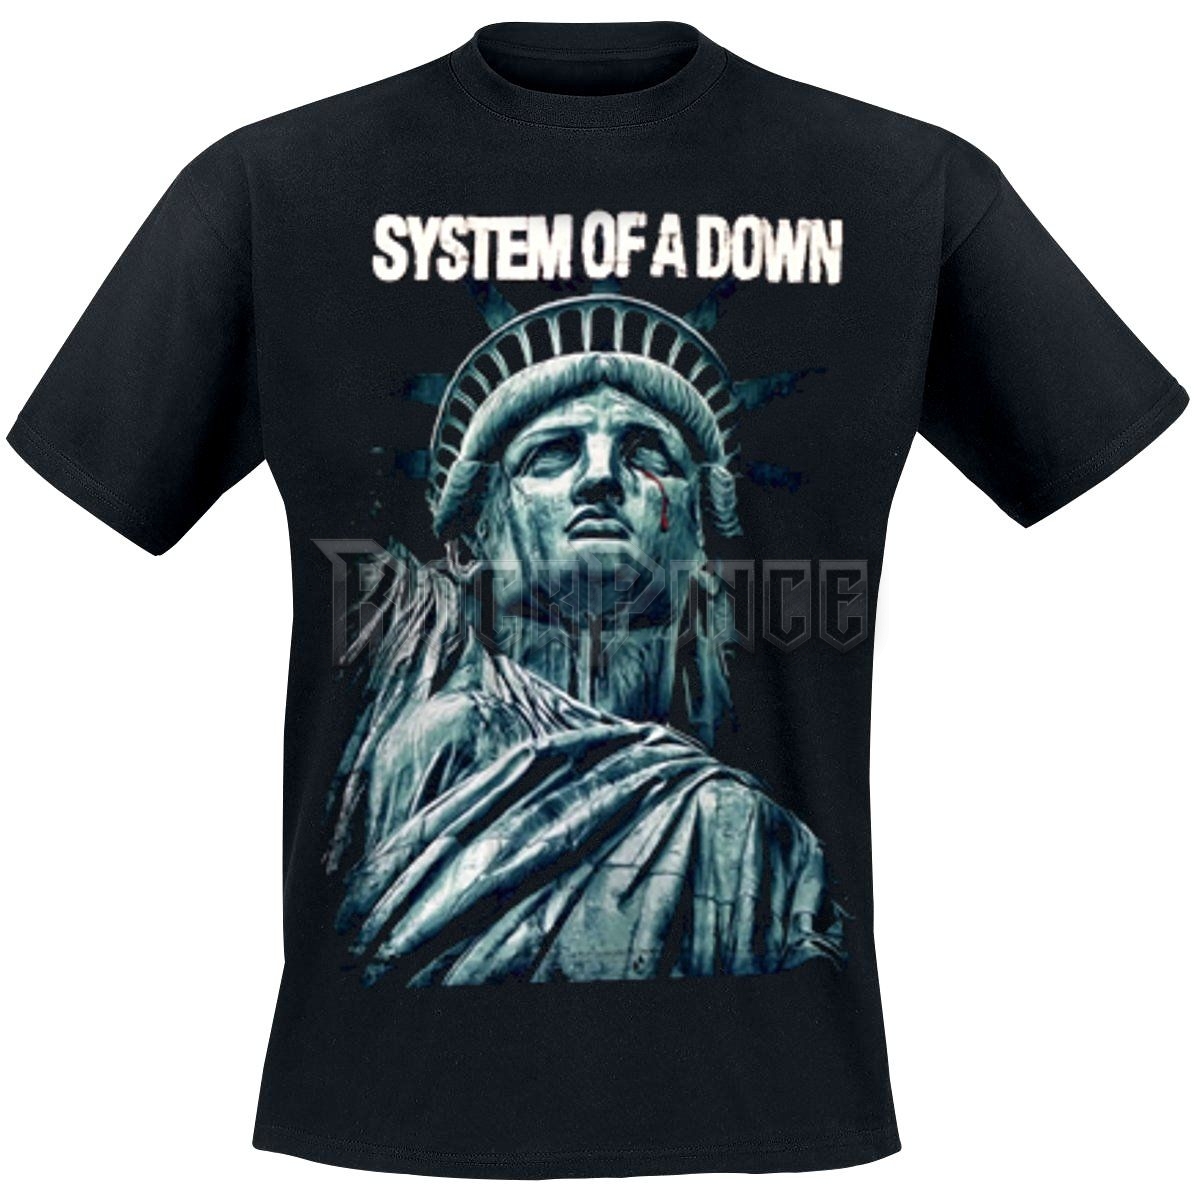 System Of A Down - Statue Of Liberty - UNISEX PÓLÓ